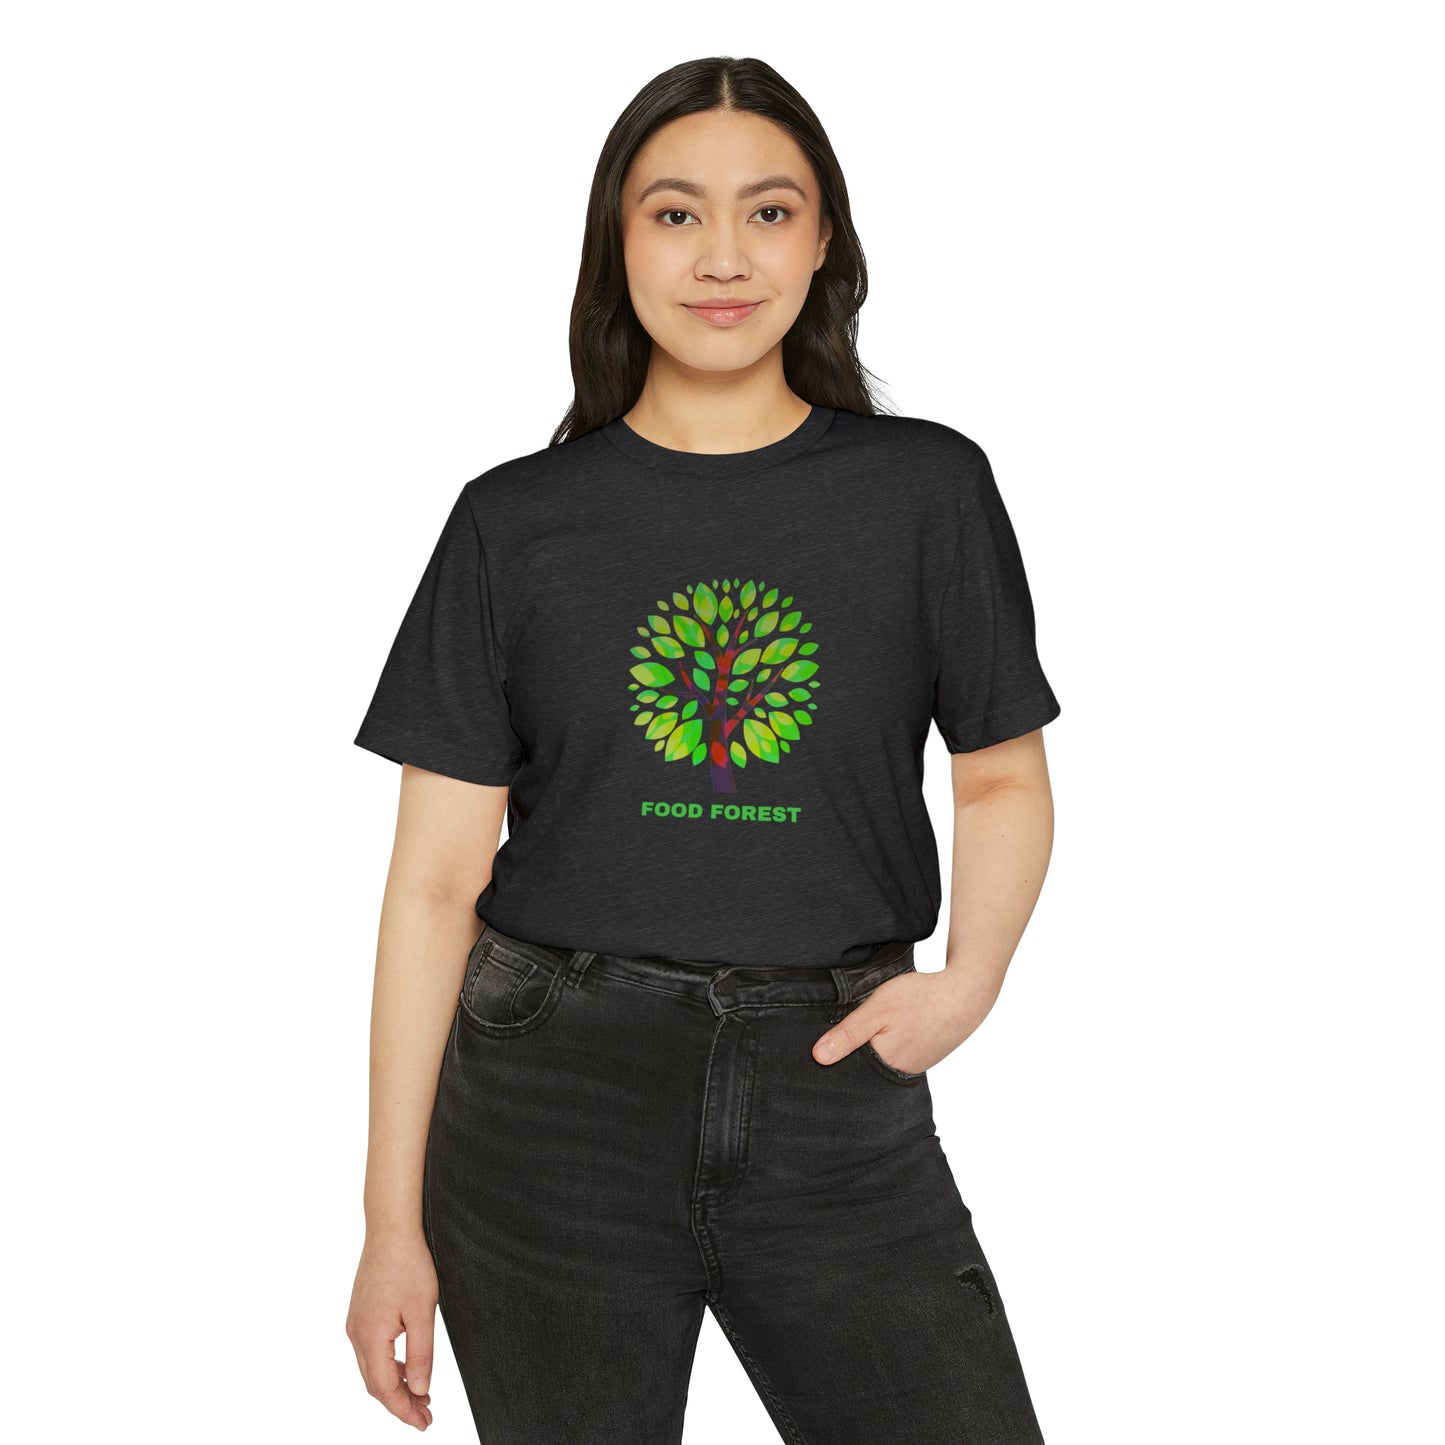 FOOD FOREST, Unisex Recycled Organic T-Shirt